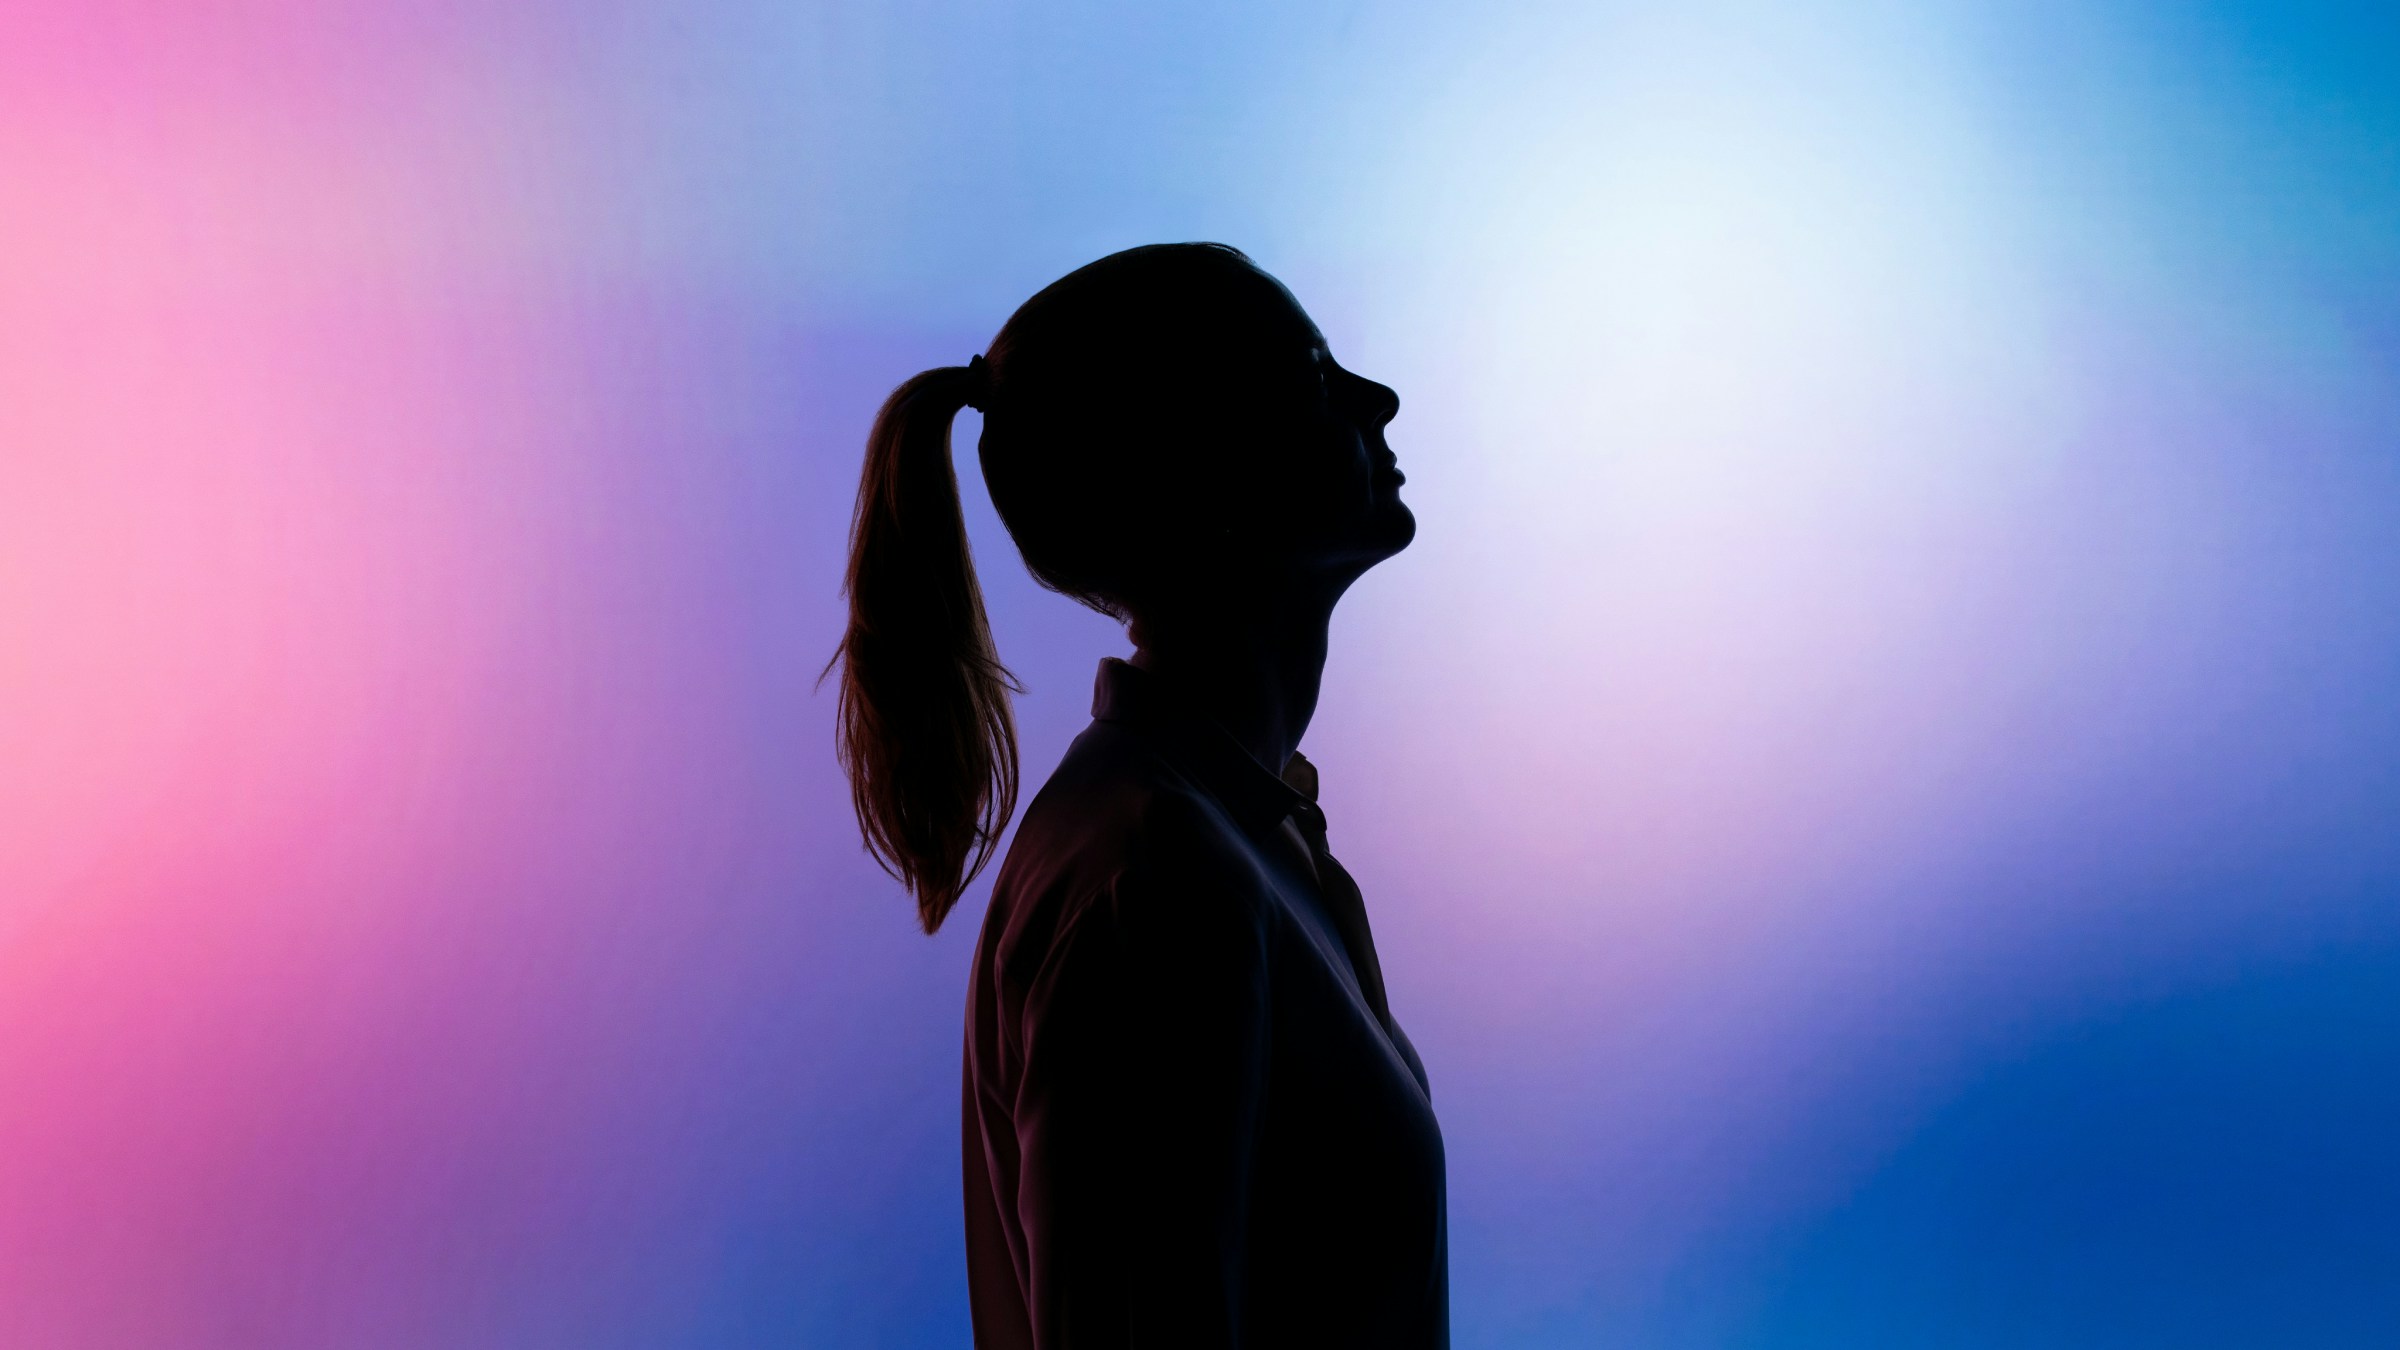 Silhouette of girl on coloured background